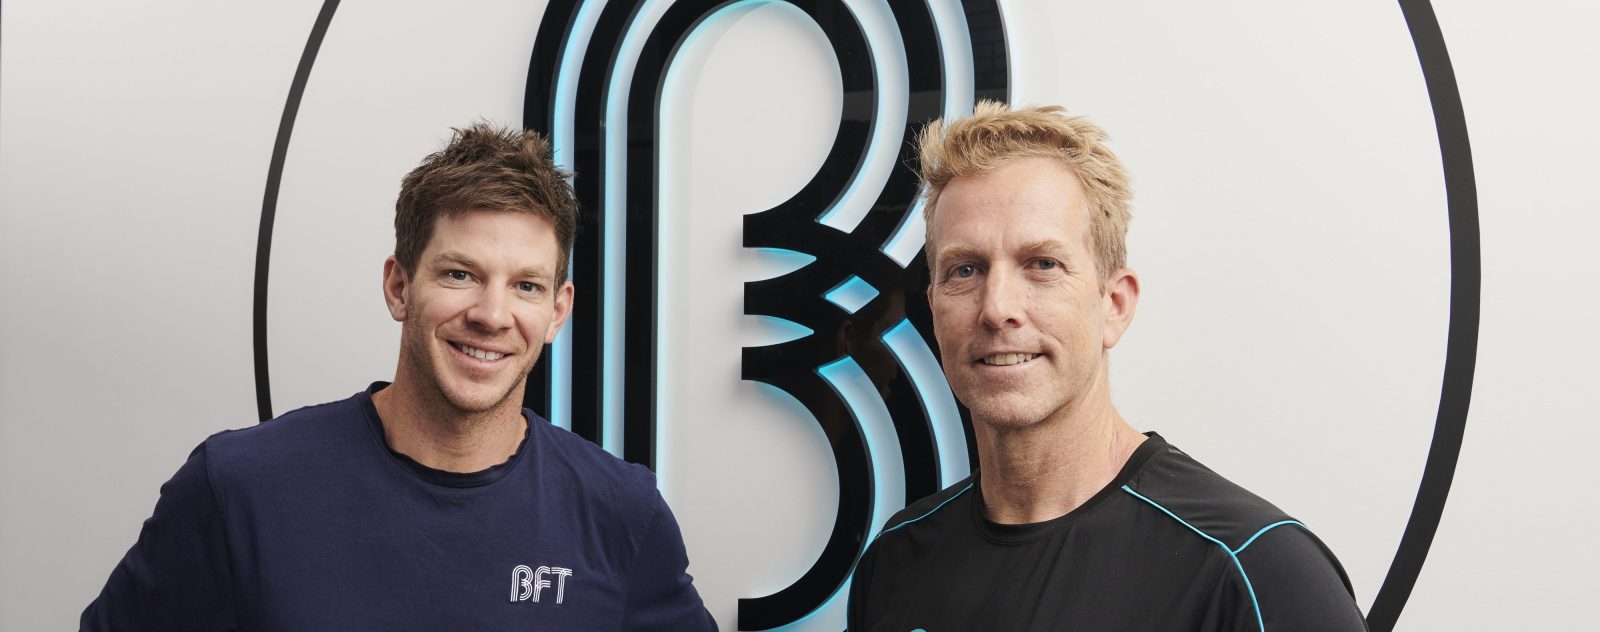 Cricketer Tim Pain and BFT gyms joint CEO Cameron Falloon